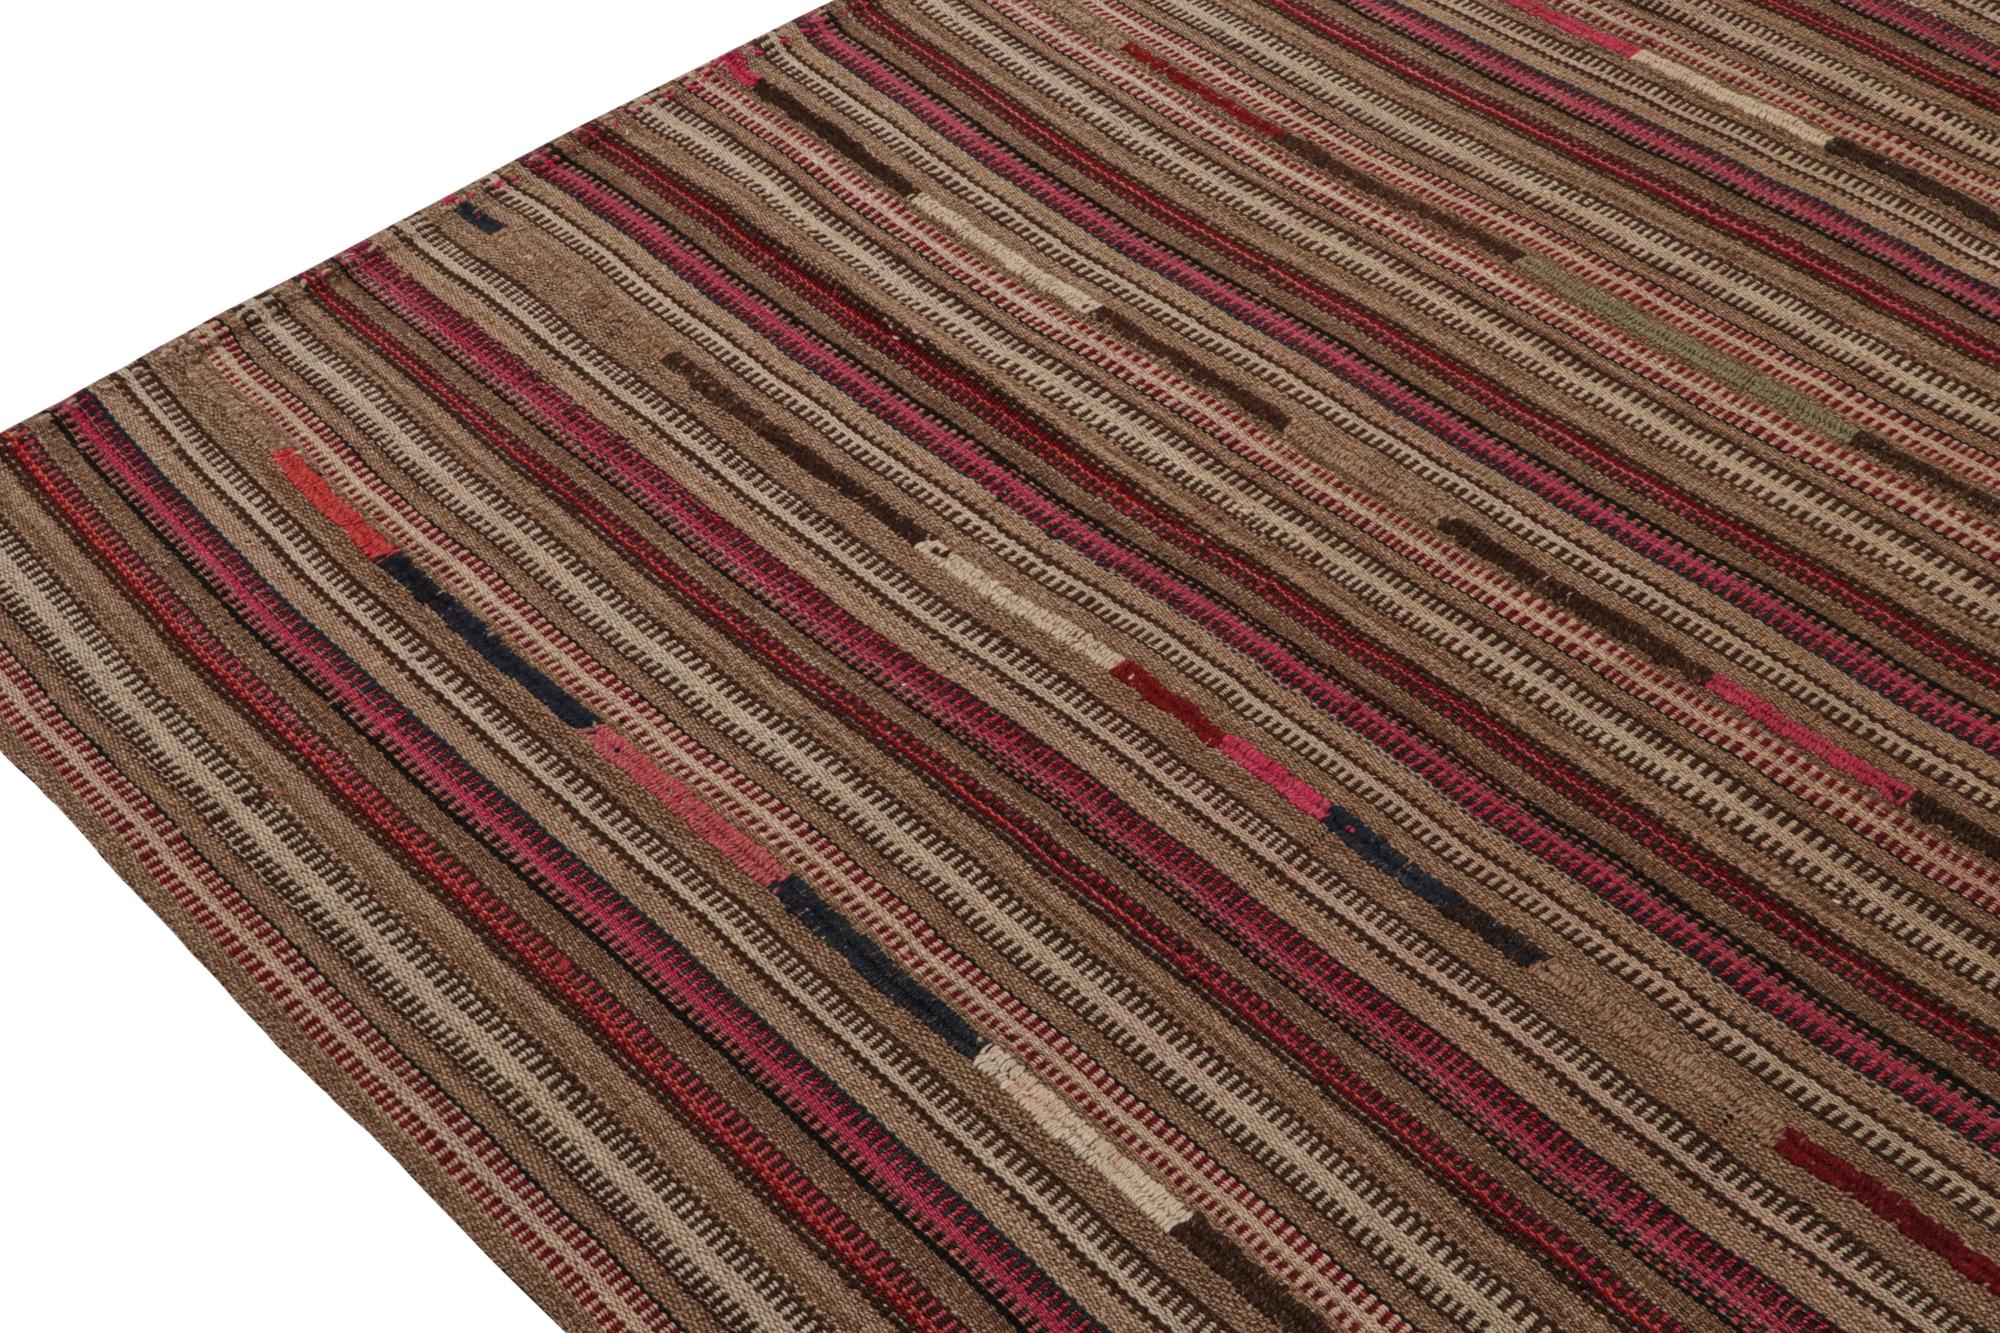 Mid-20th Century Vintage Persian Kilim in Pink and Beige-Brown Stripes by Rug & Kilim For Sale